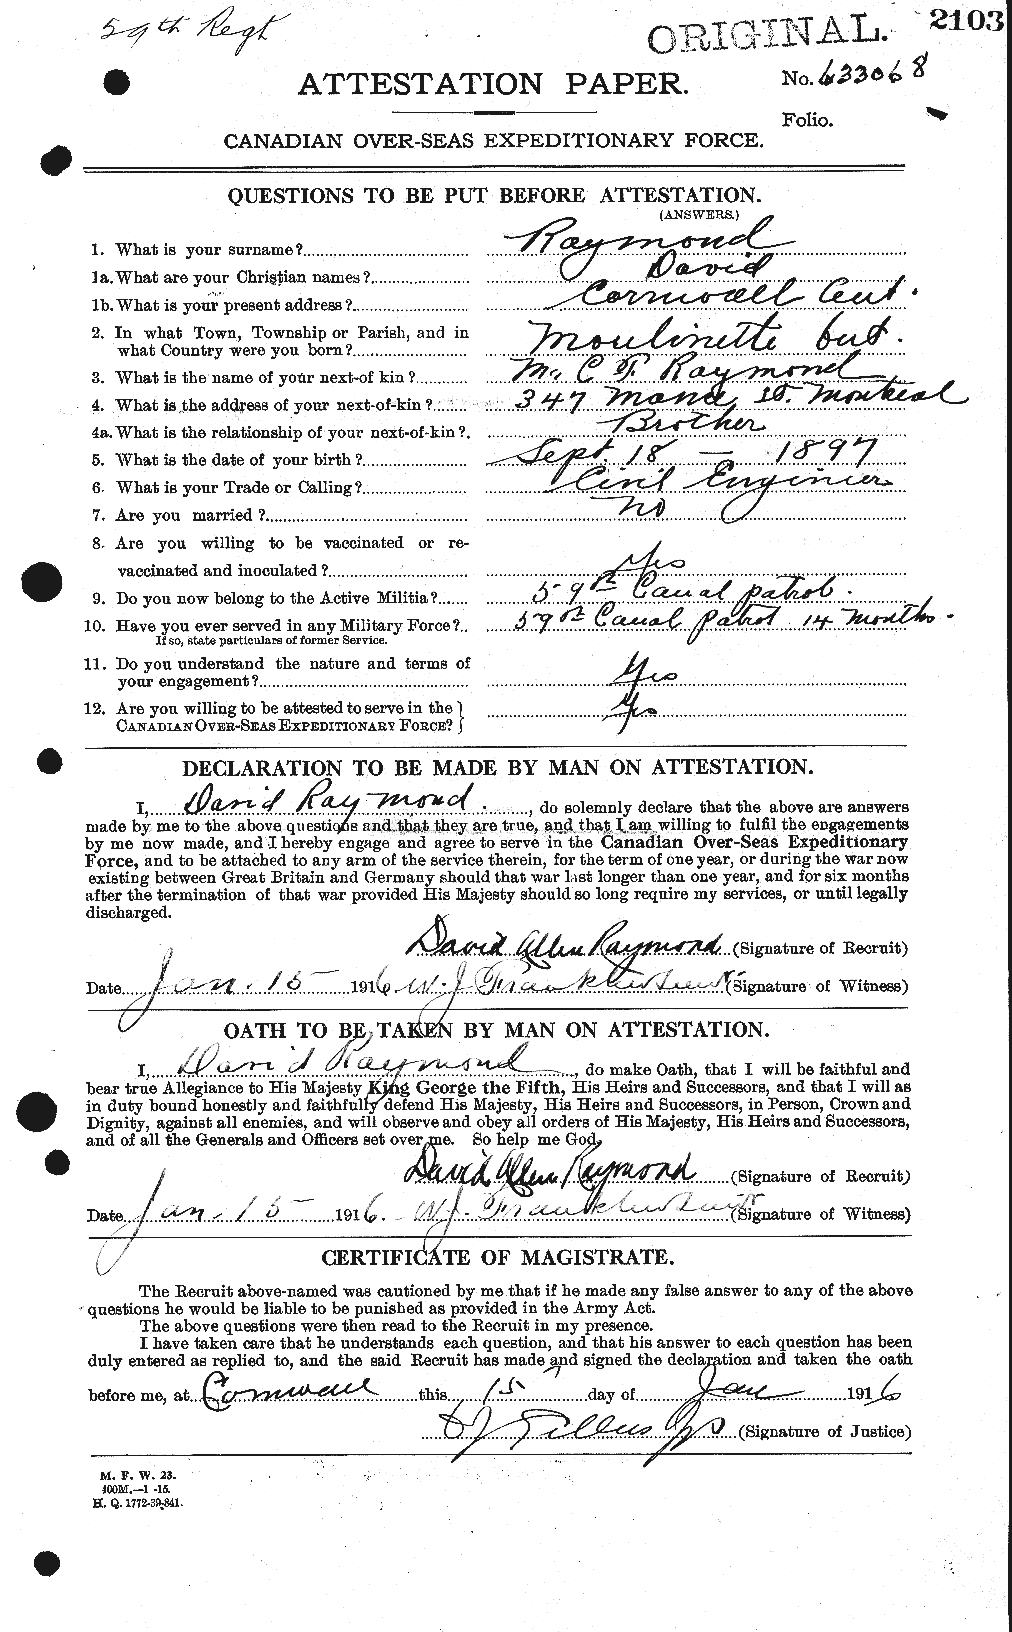 Personnel Records of the First World War - CEF 595290a